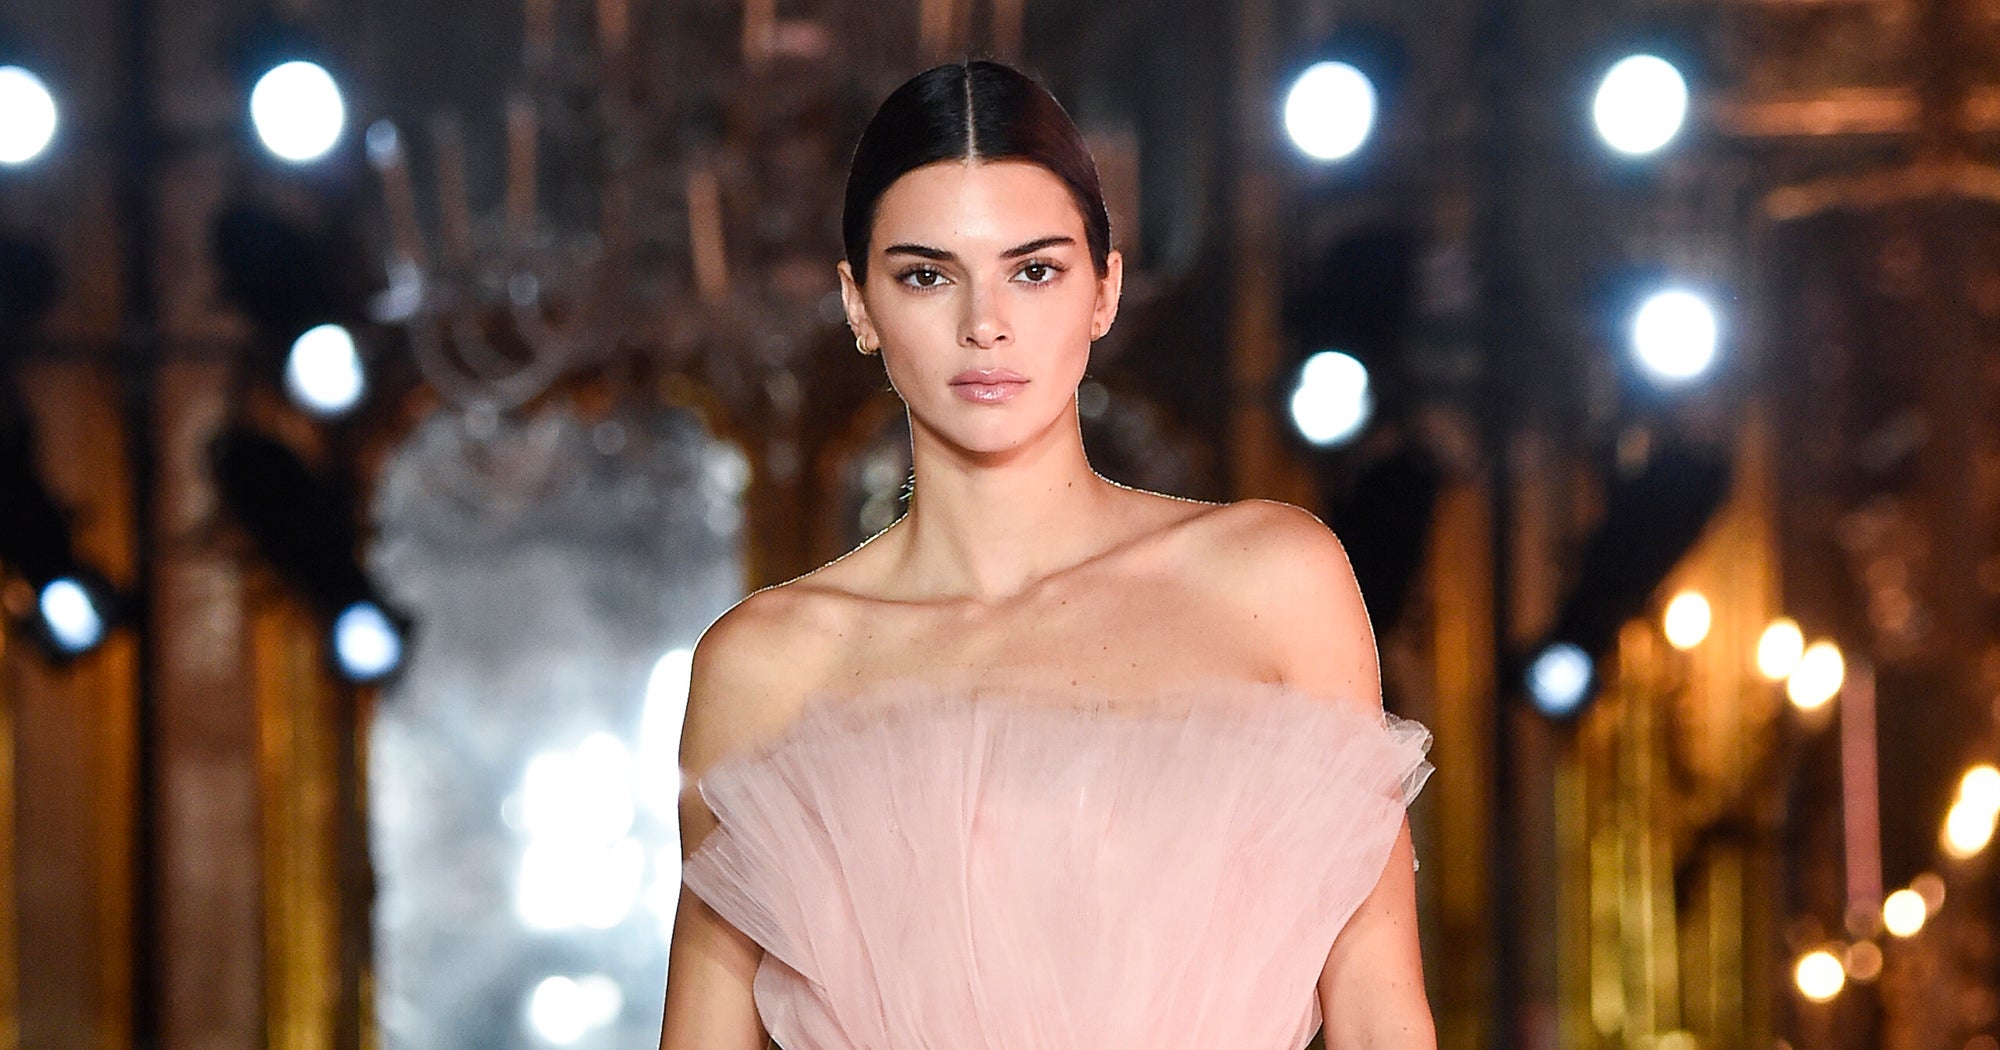 Kendall Jenner Turns 24, Birthday Party Details, Dress